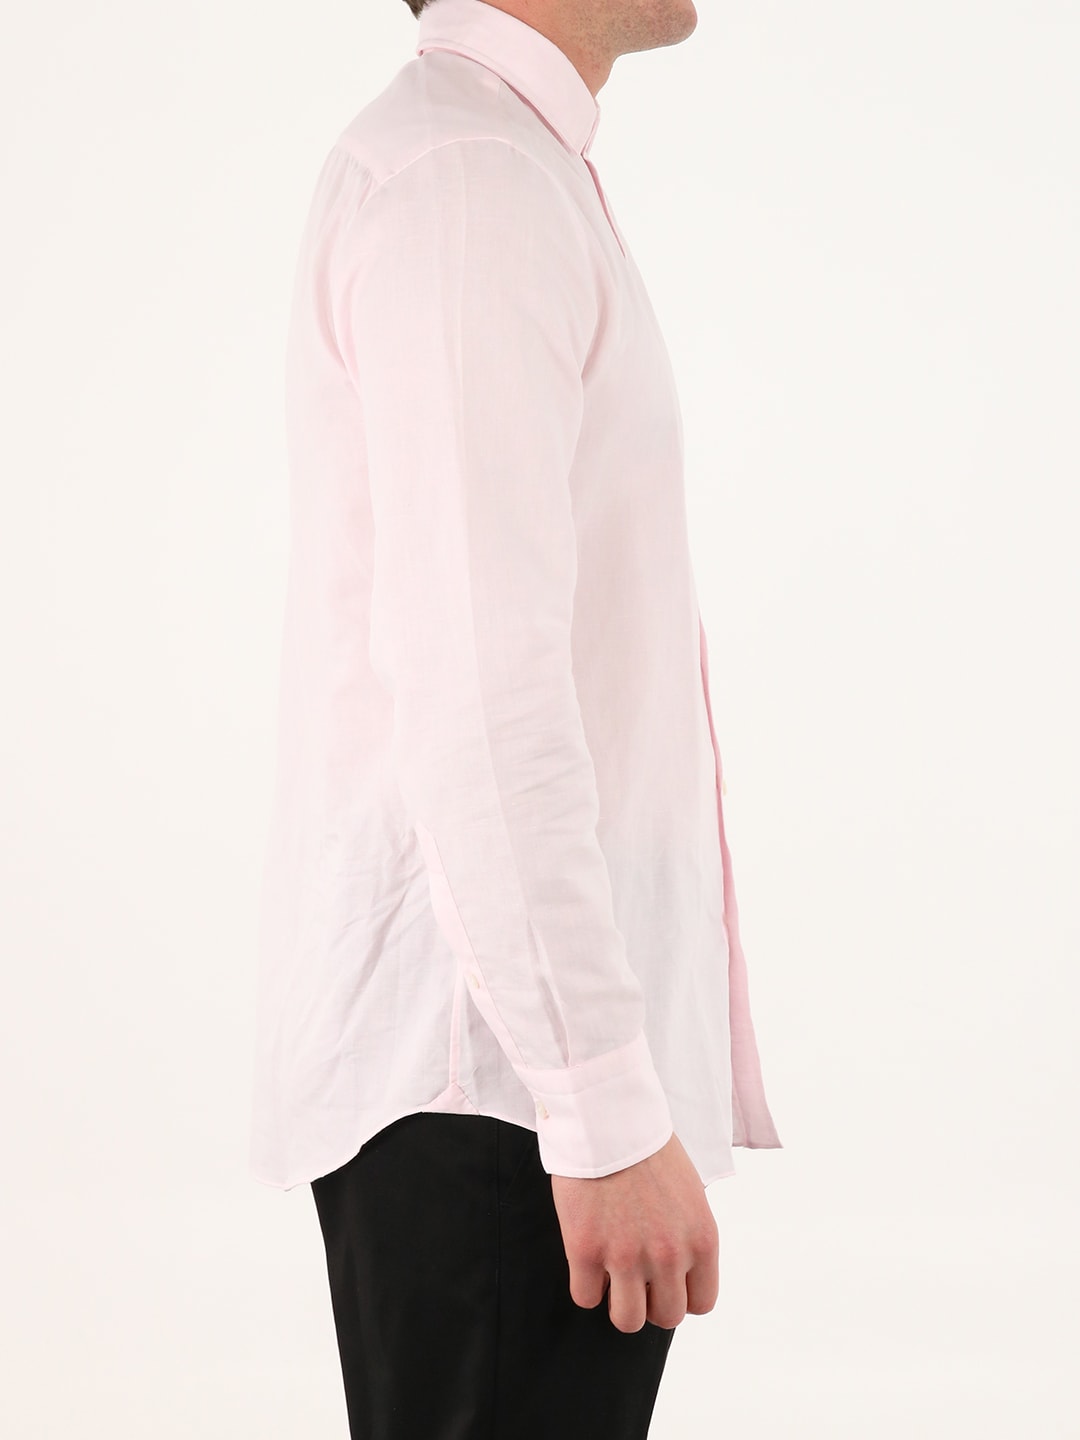 Pink Shirt With Open Collar